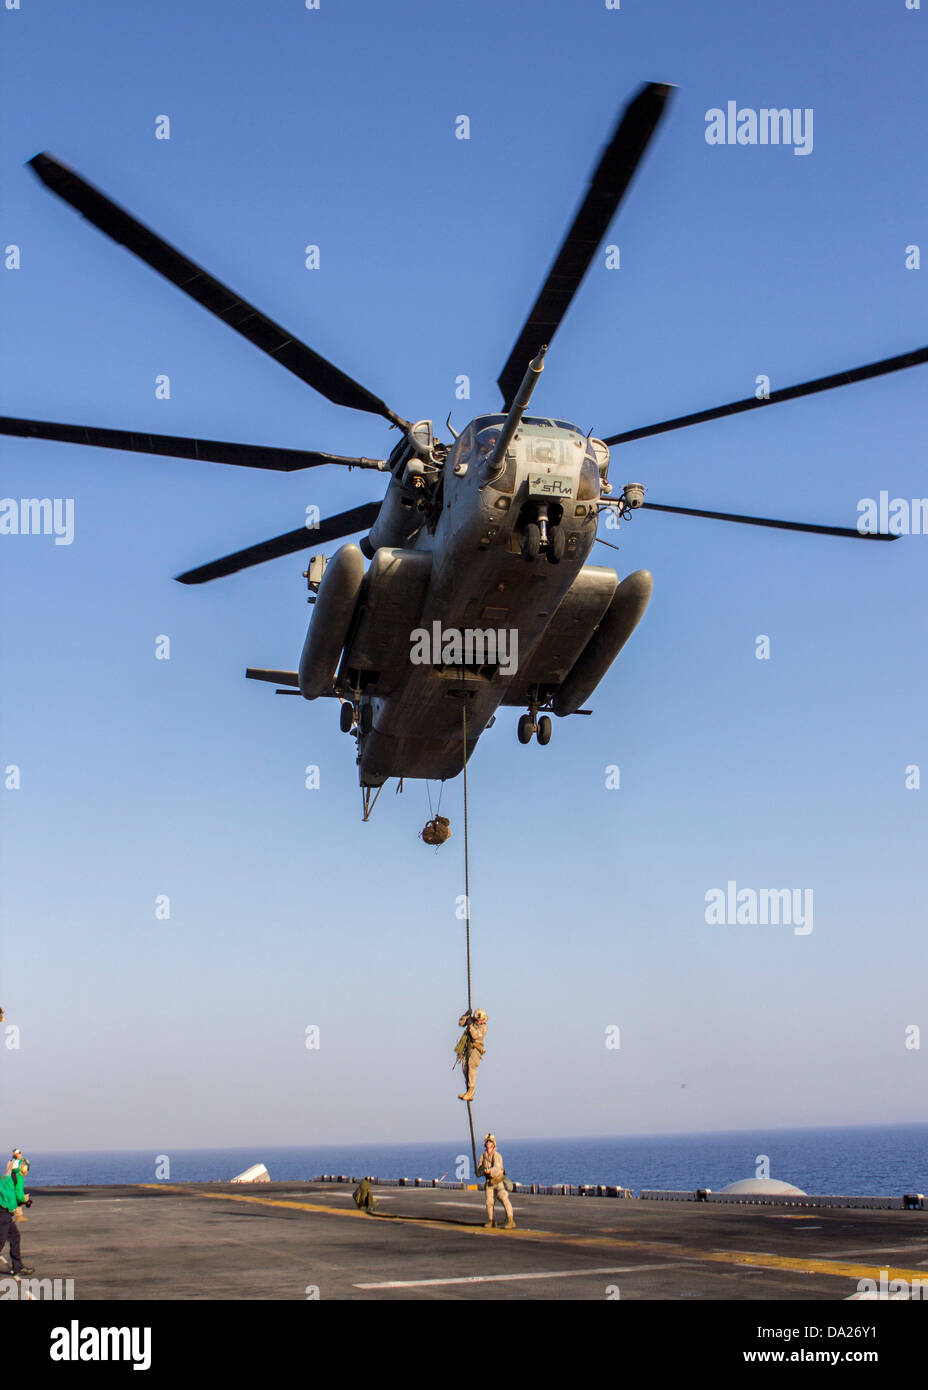 A US Marine assigned to Battalion Landing Team fast ropes from a CH-53 Super Stallion helicopter during familiarization training on the flight deck of the USS Kearsarge June 30, 2013. Stock Photo